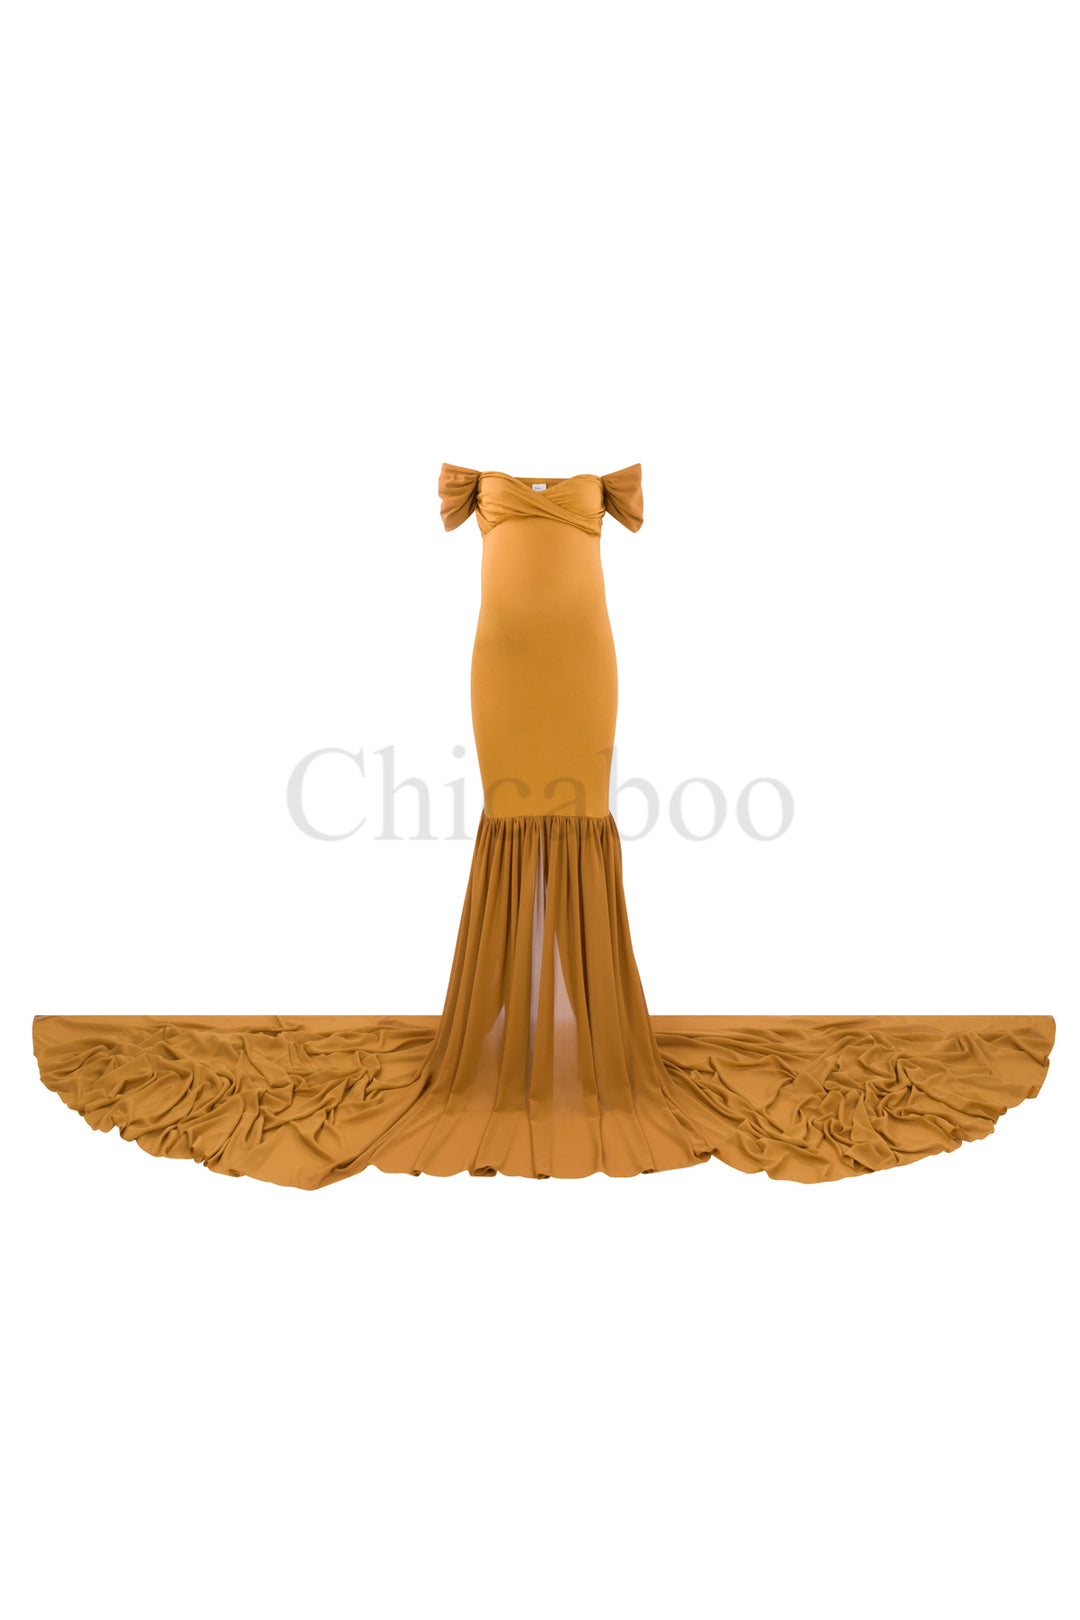 Amber Gold Monroe Maternity Gown with tossing train One-Size